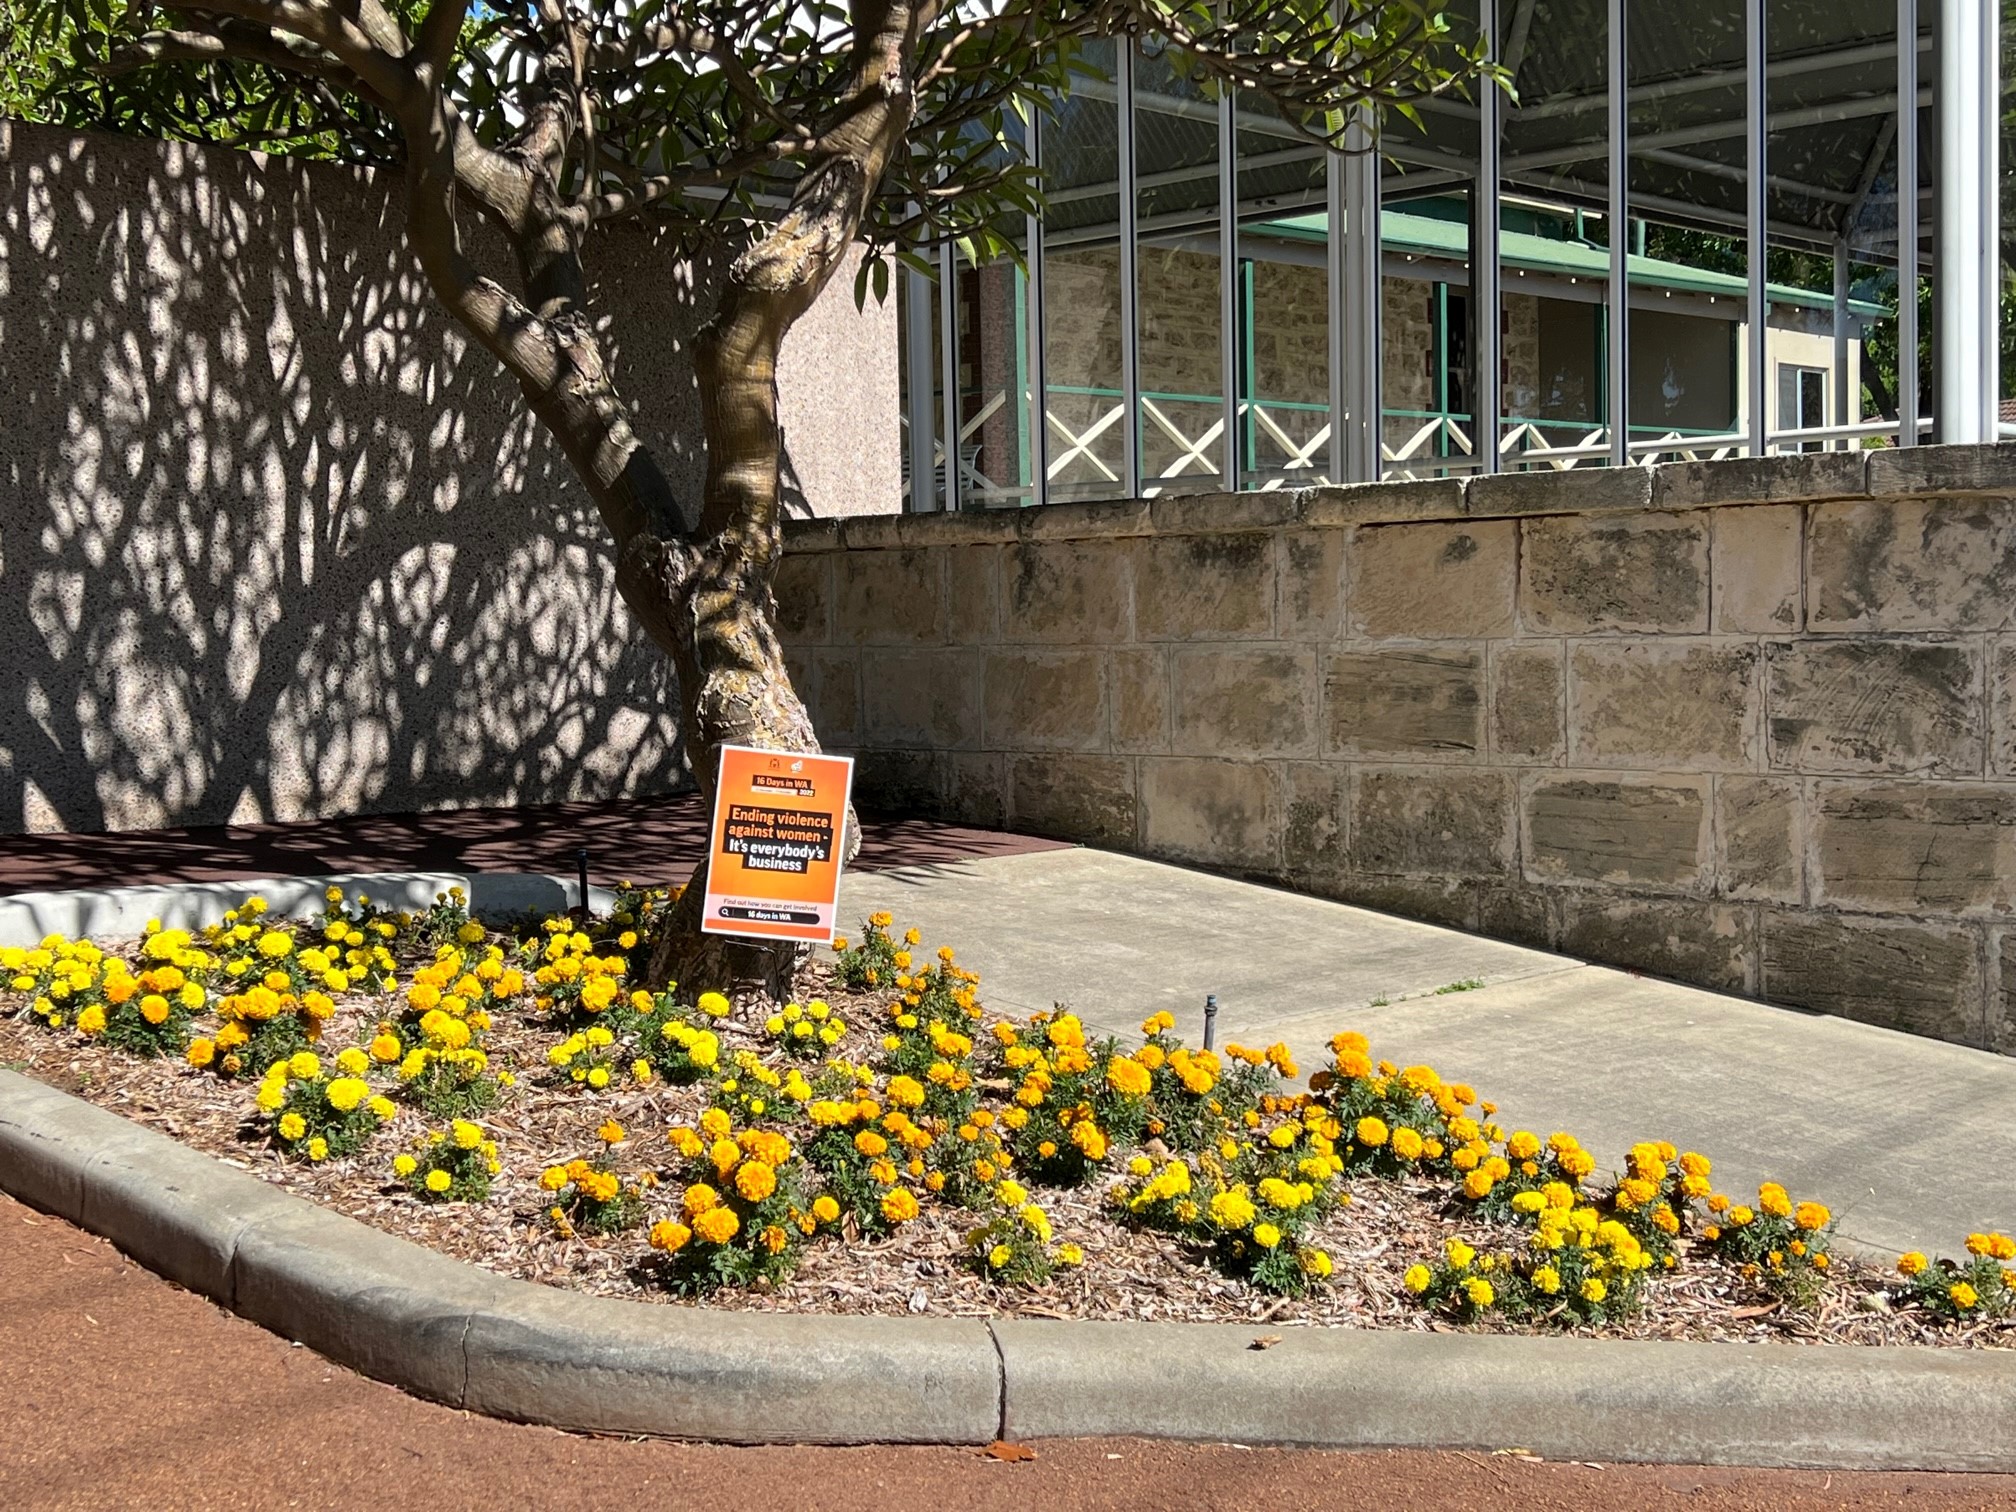 the entrance of the cortege driveway of Fremantle Cemetery displaying marigold flowers in a garden bed